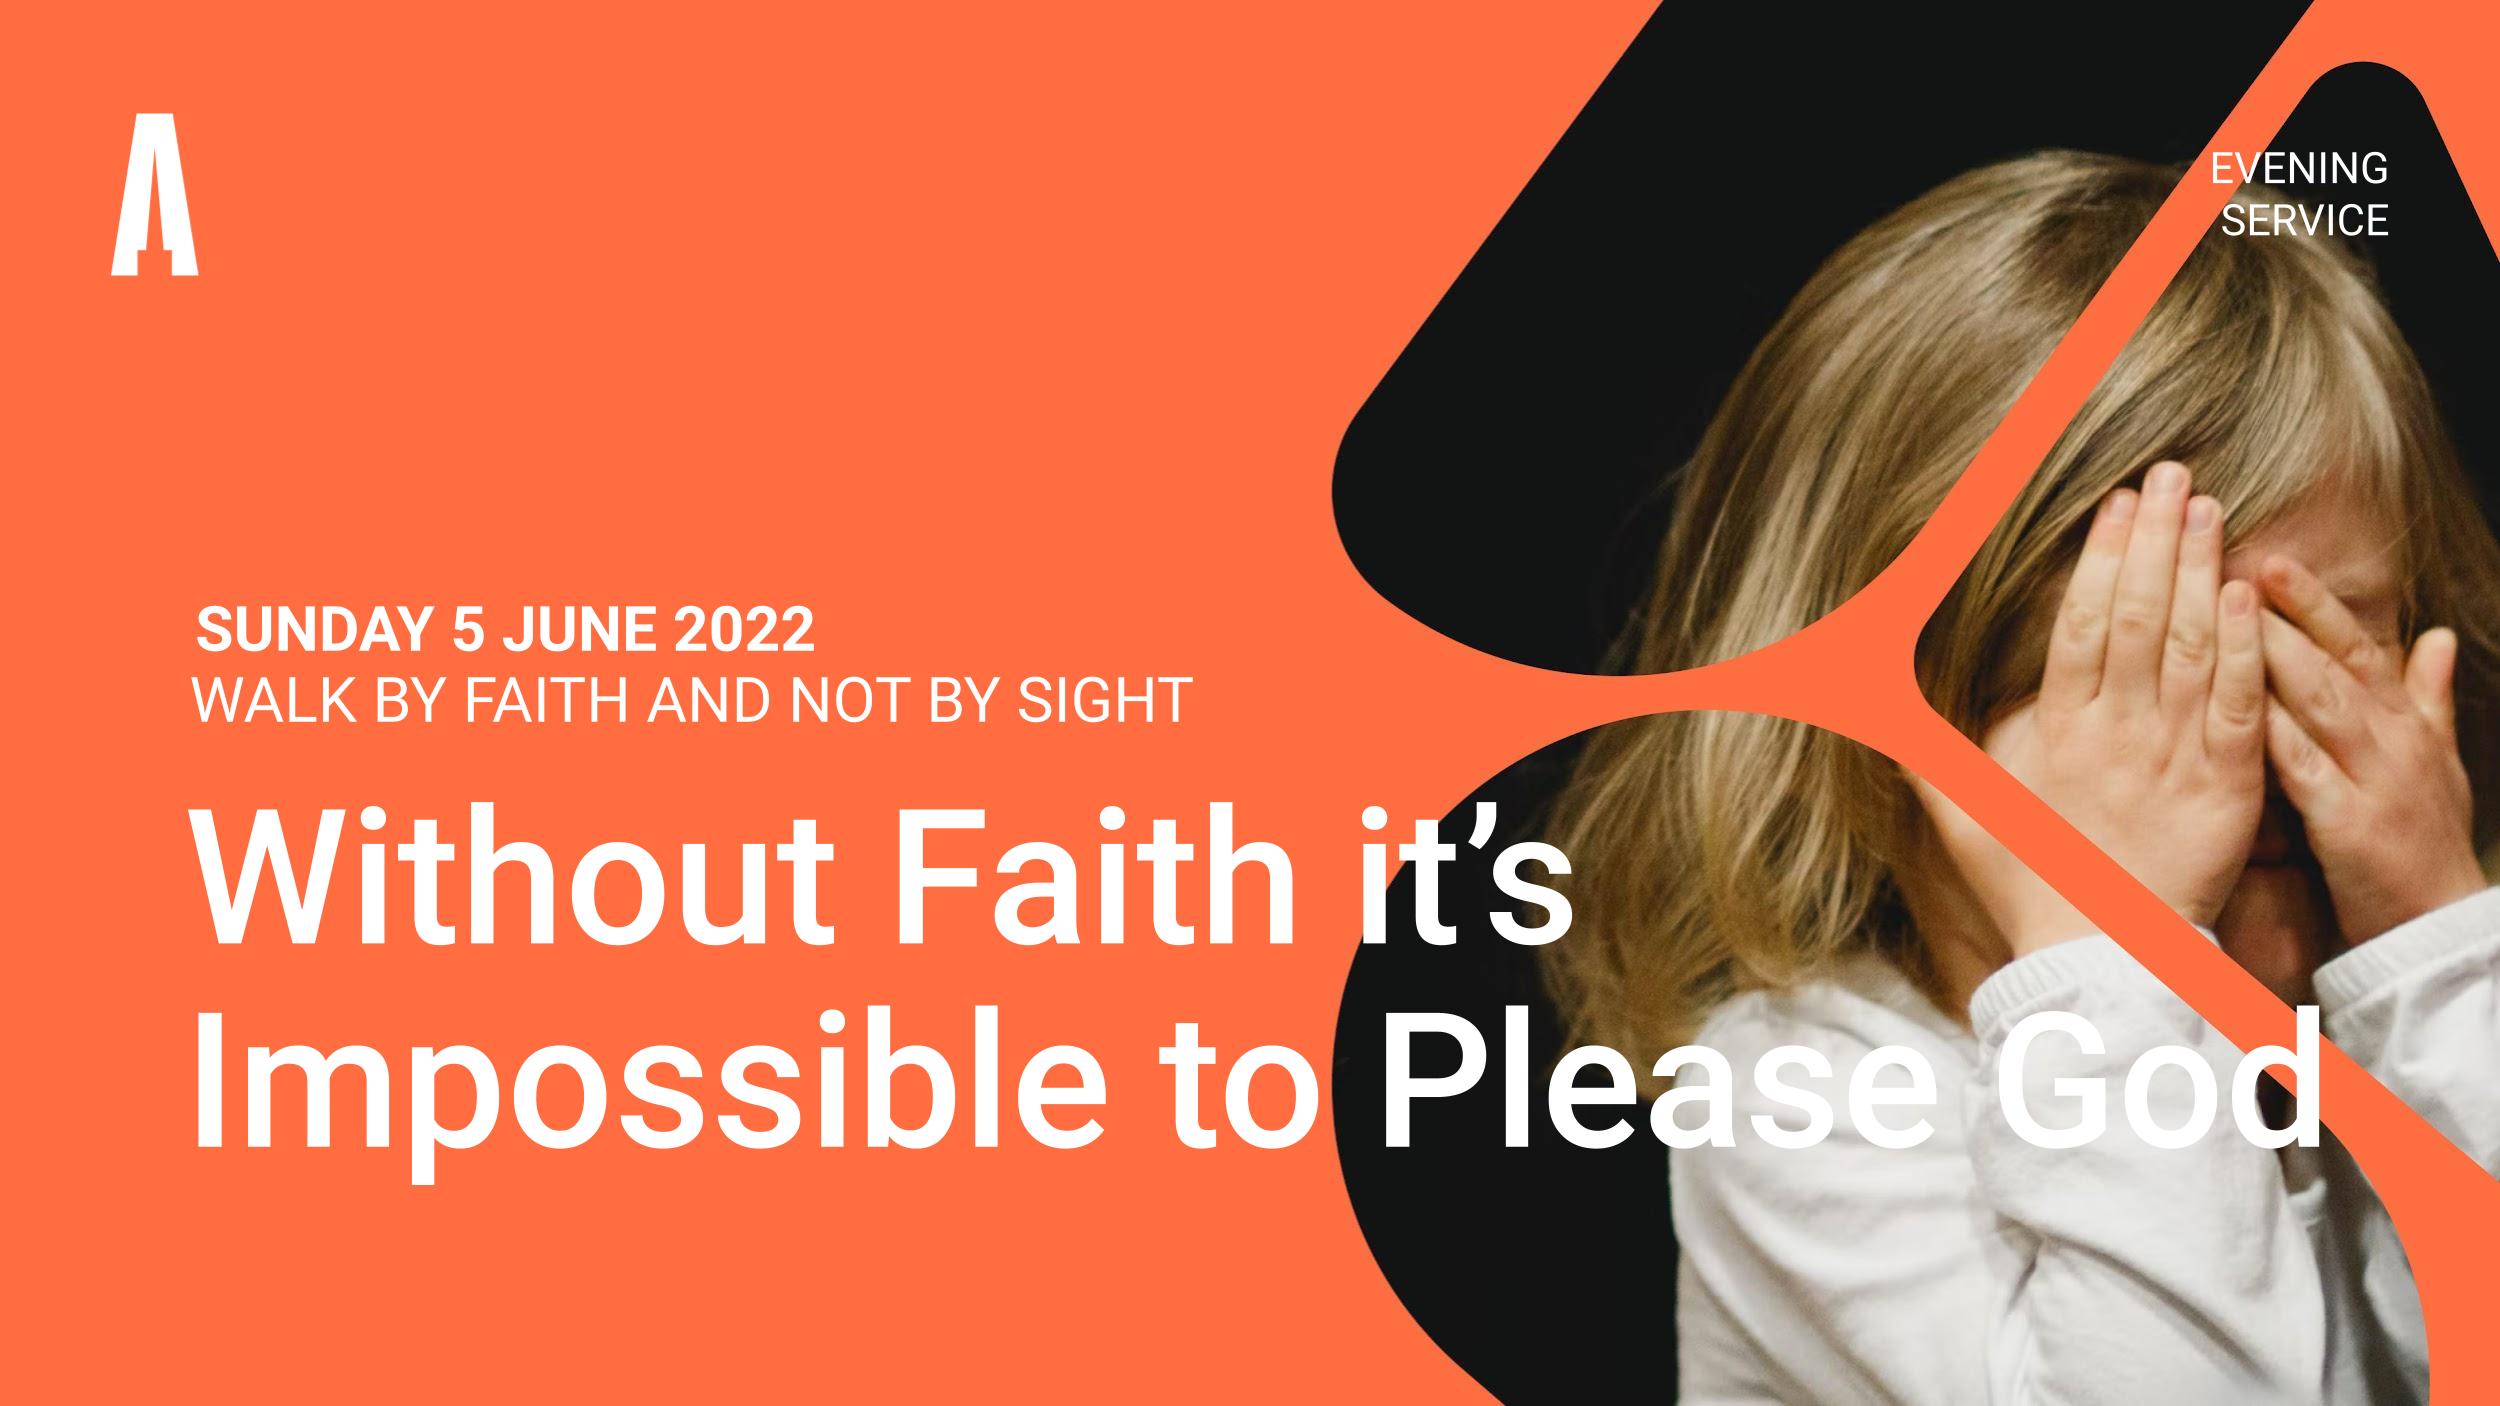 Without Faith it's Impossible to Please God